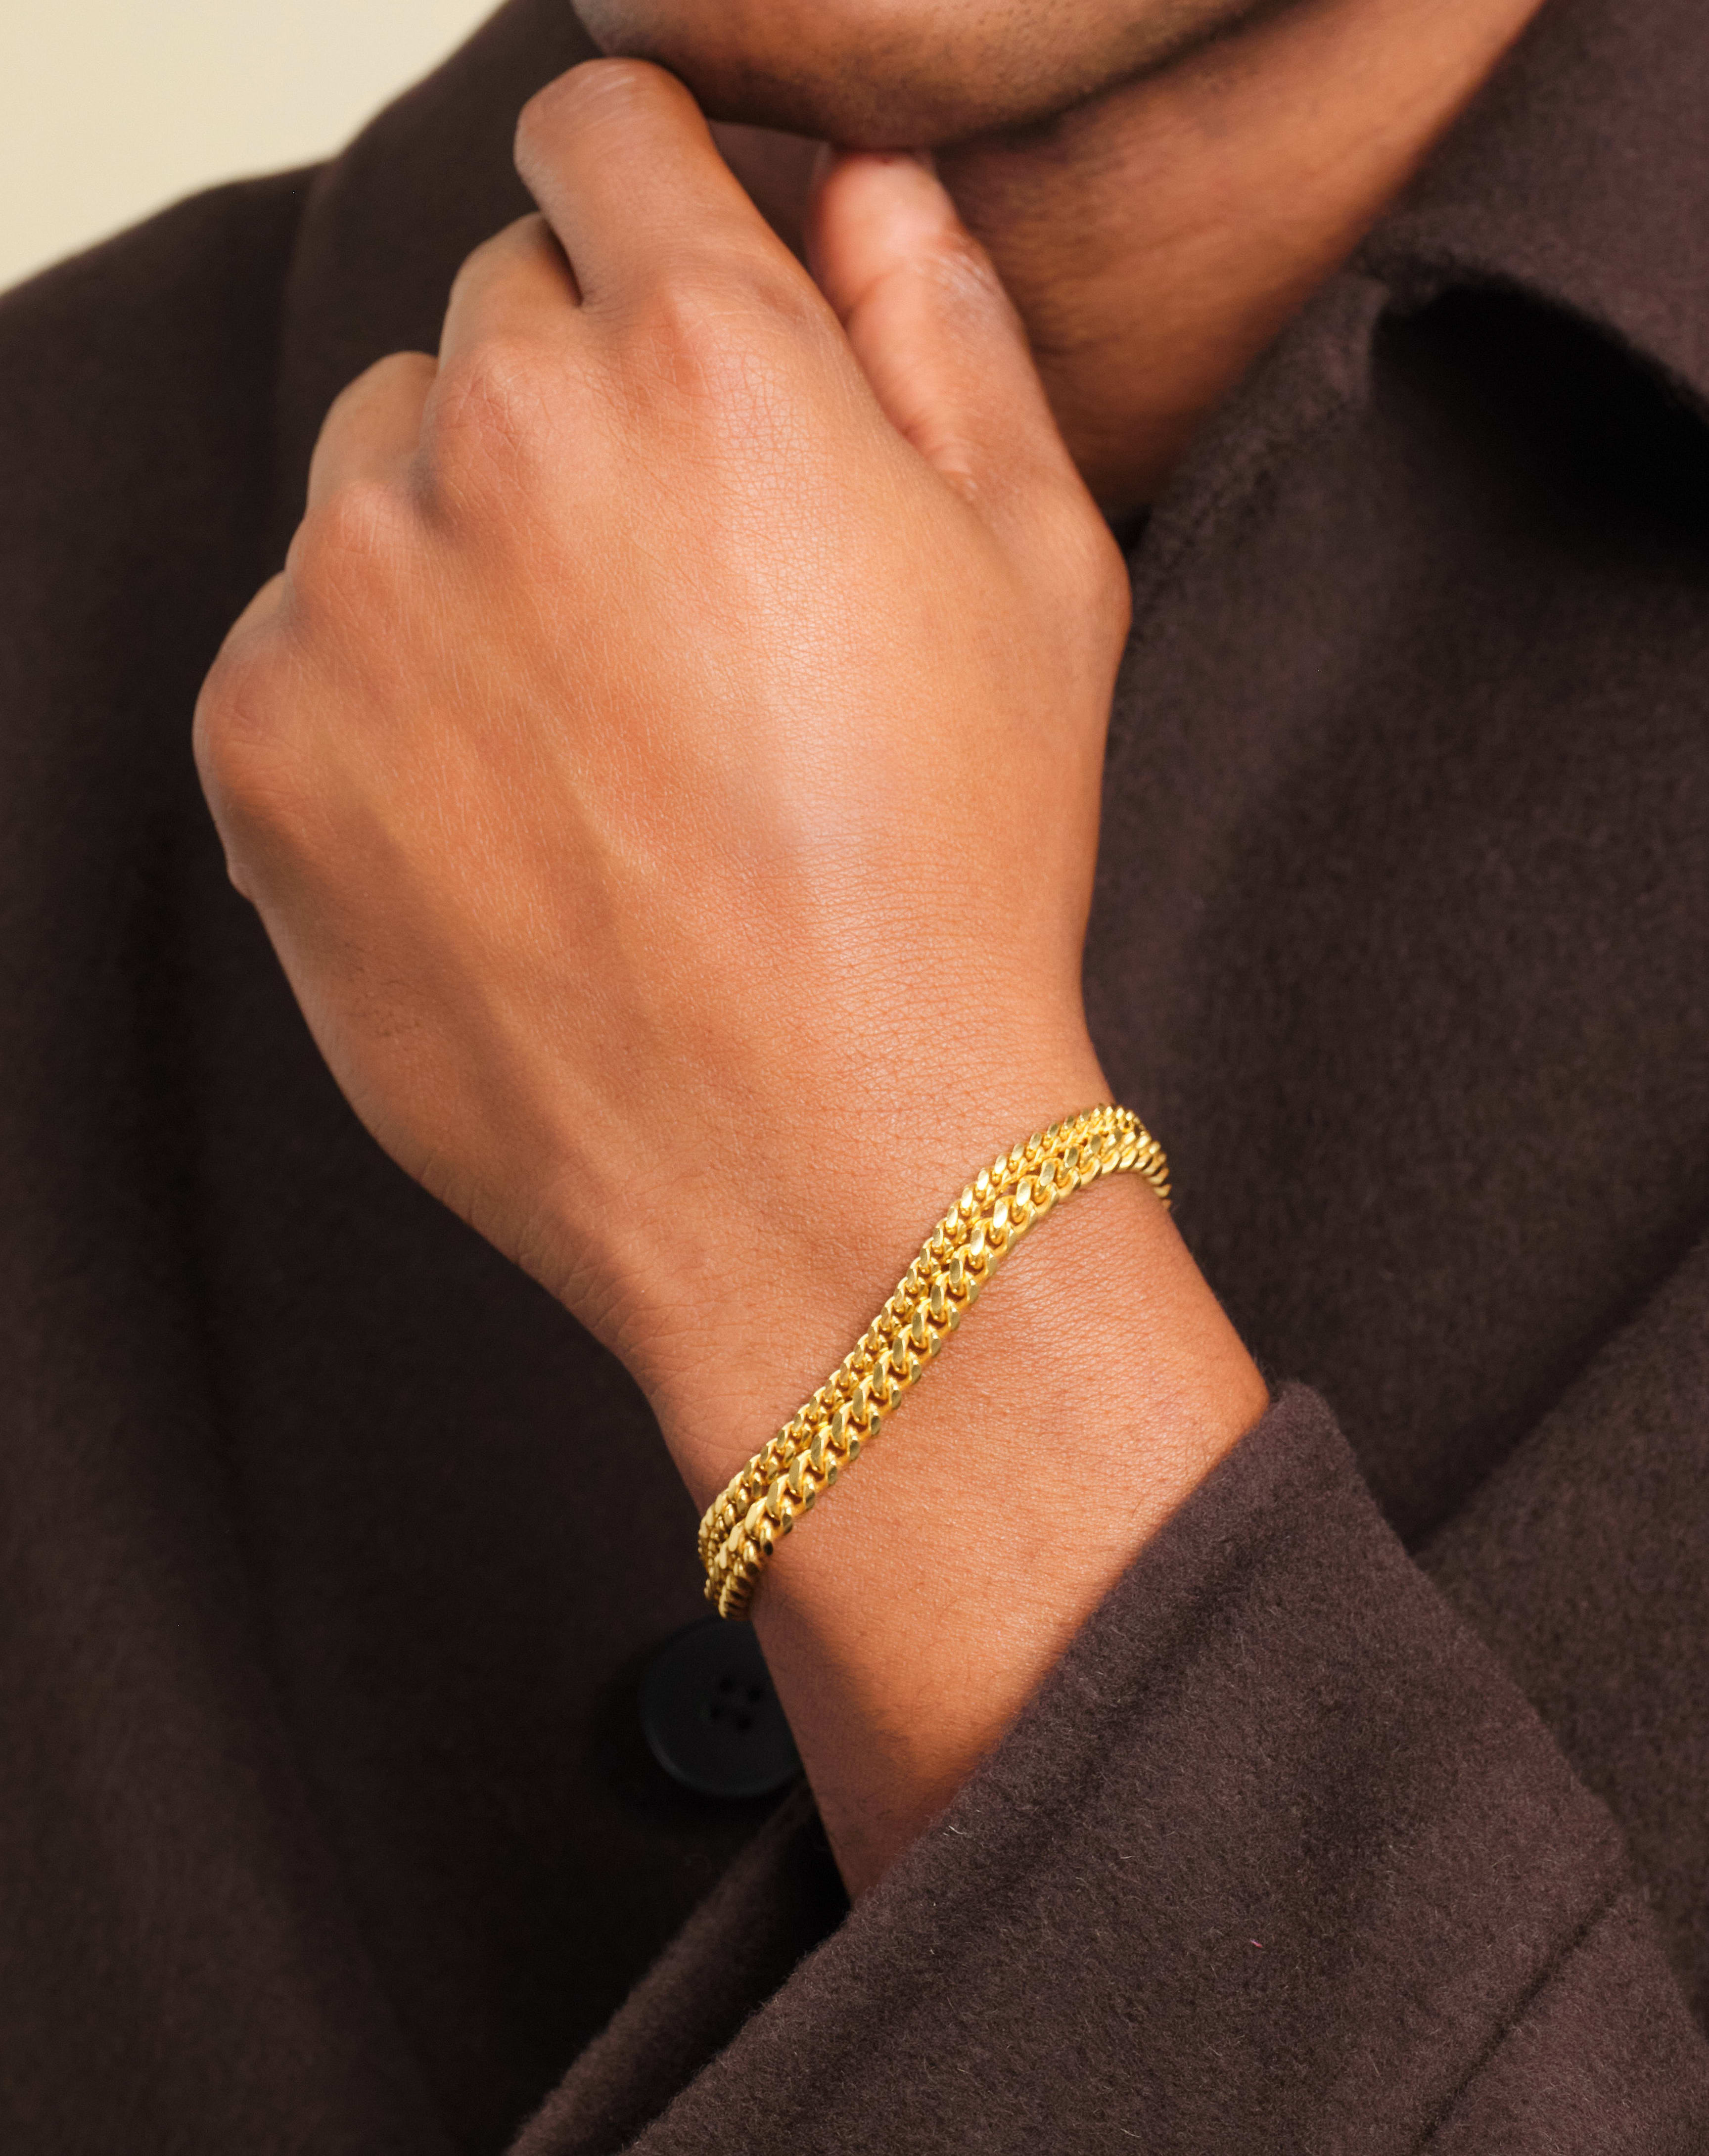 Image Cuban Link Bracelet Stack - Gold - Made with Precious Metals